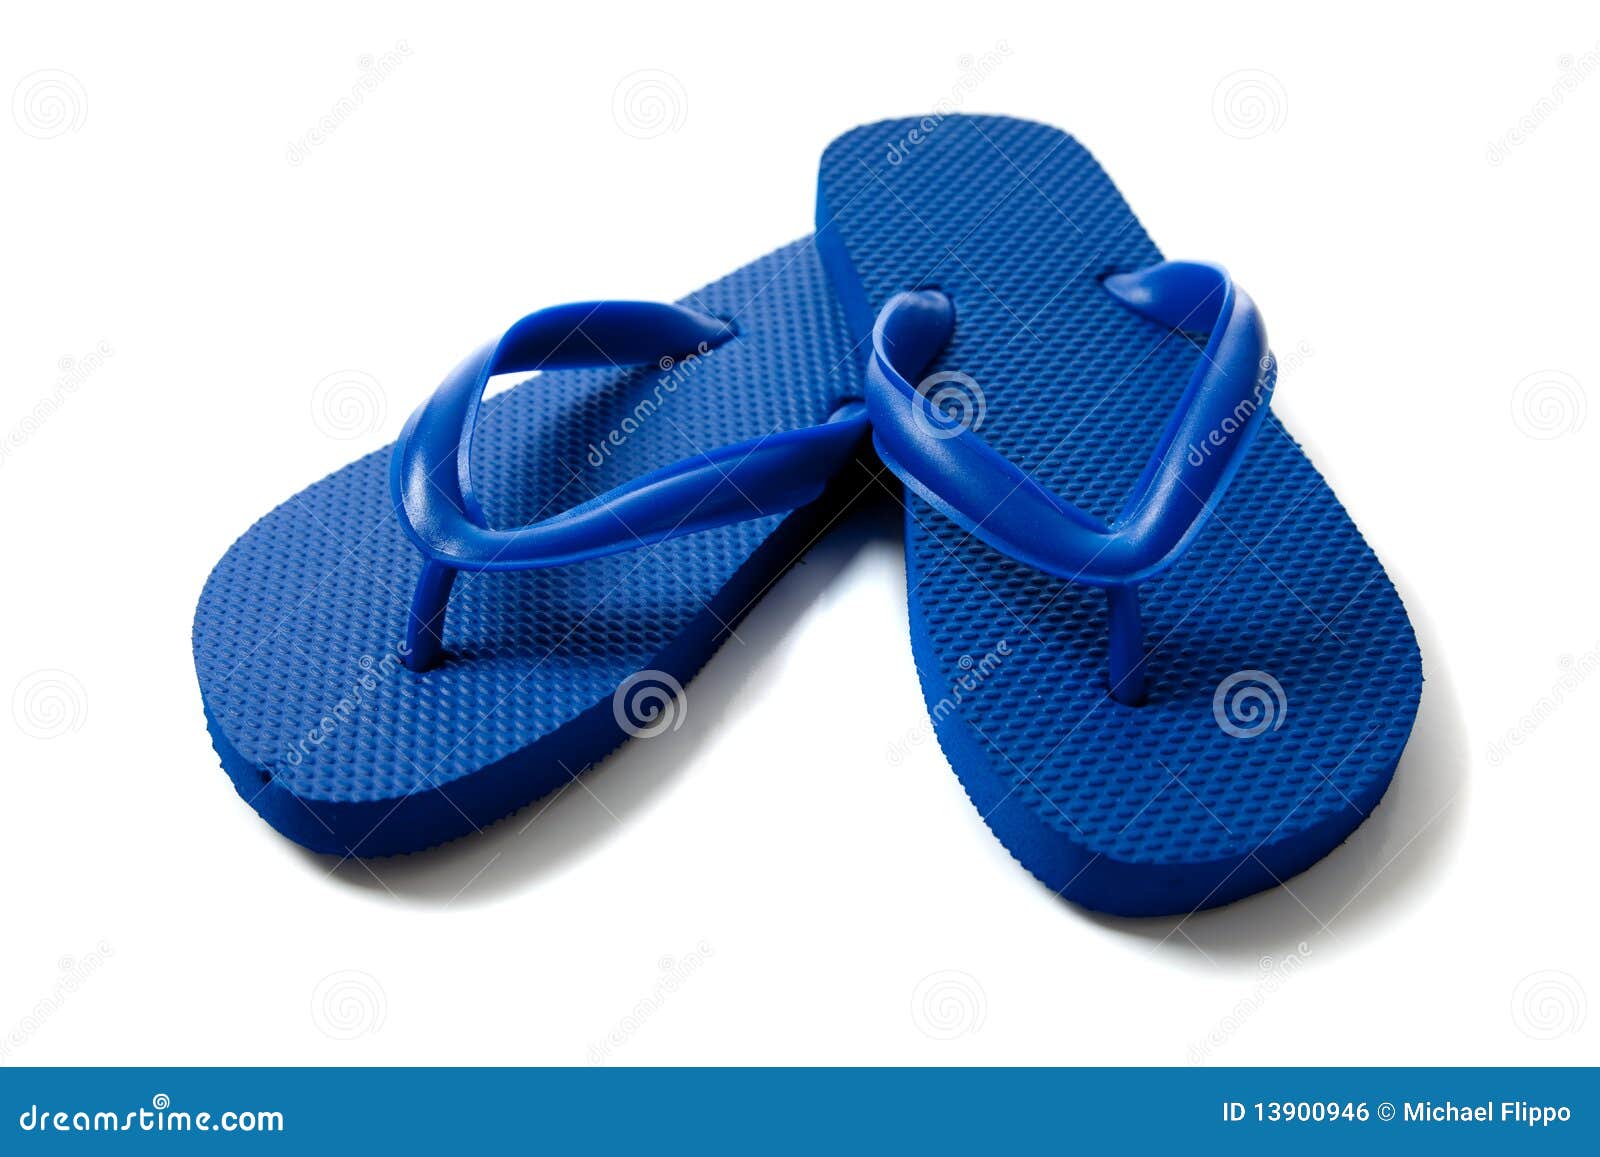 Colored Flipflops on a White Background Stock Photo - Image of summer ...